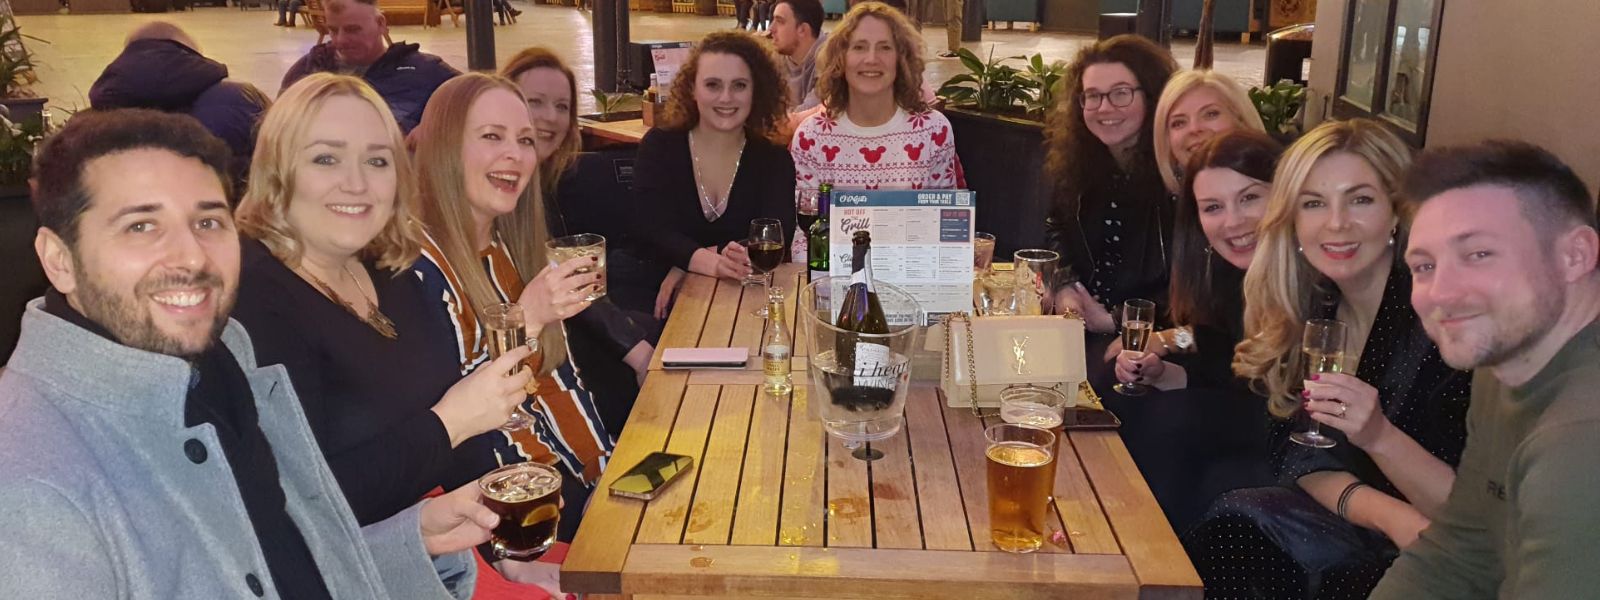 The Conferencing and Events team enjoy an evening in Glasgow to celebrate Christmas